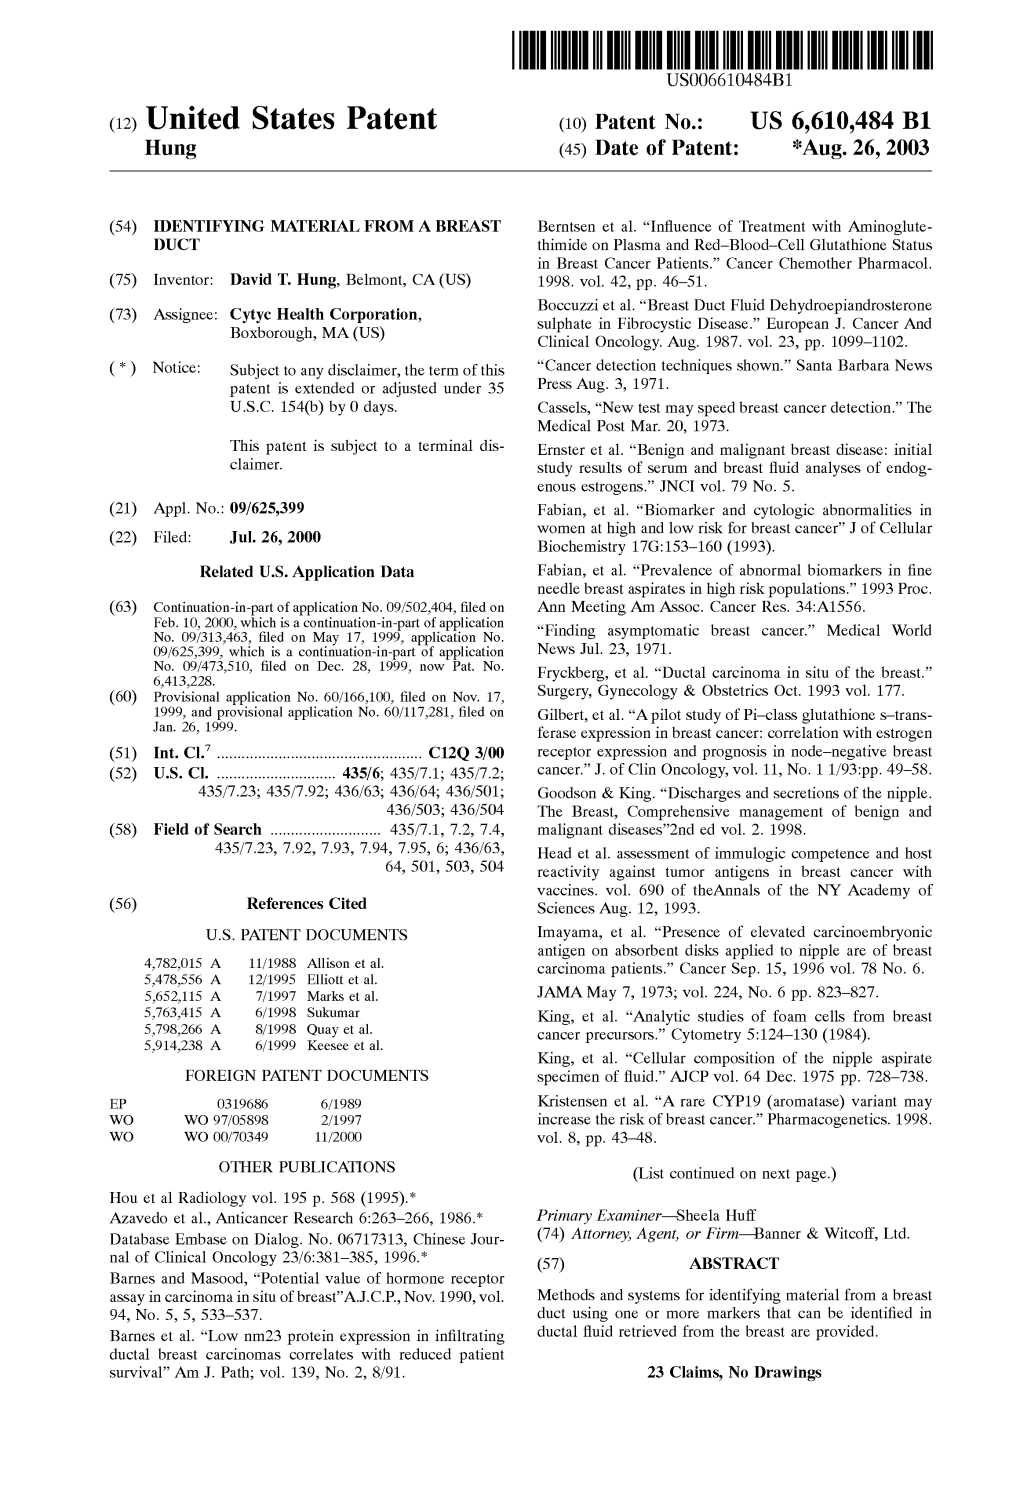 (12) United States Patent (10) Patent No.: US 6,610,484 B1 Hung (45) Date of Patent: *Aug